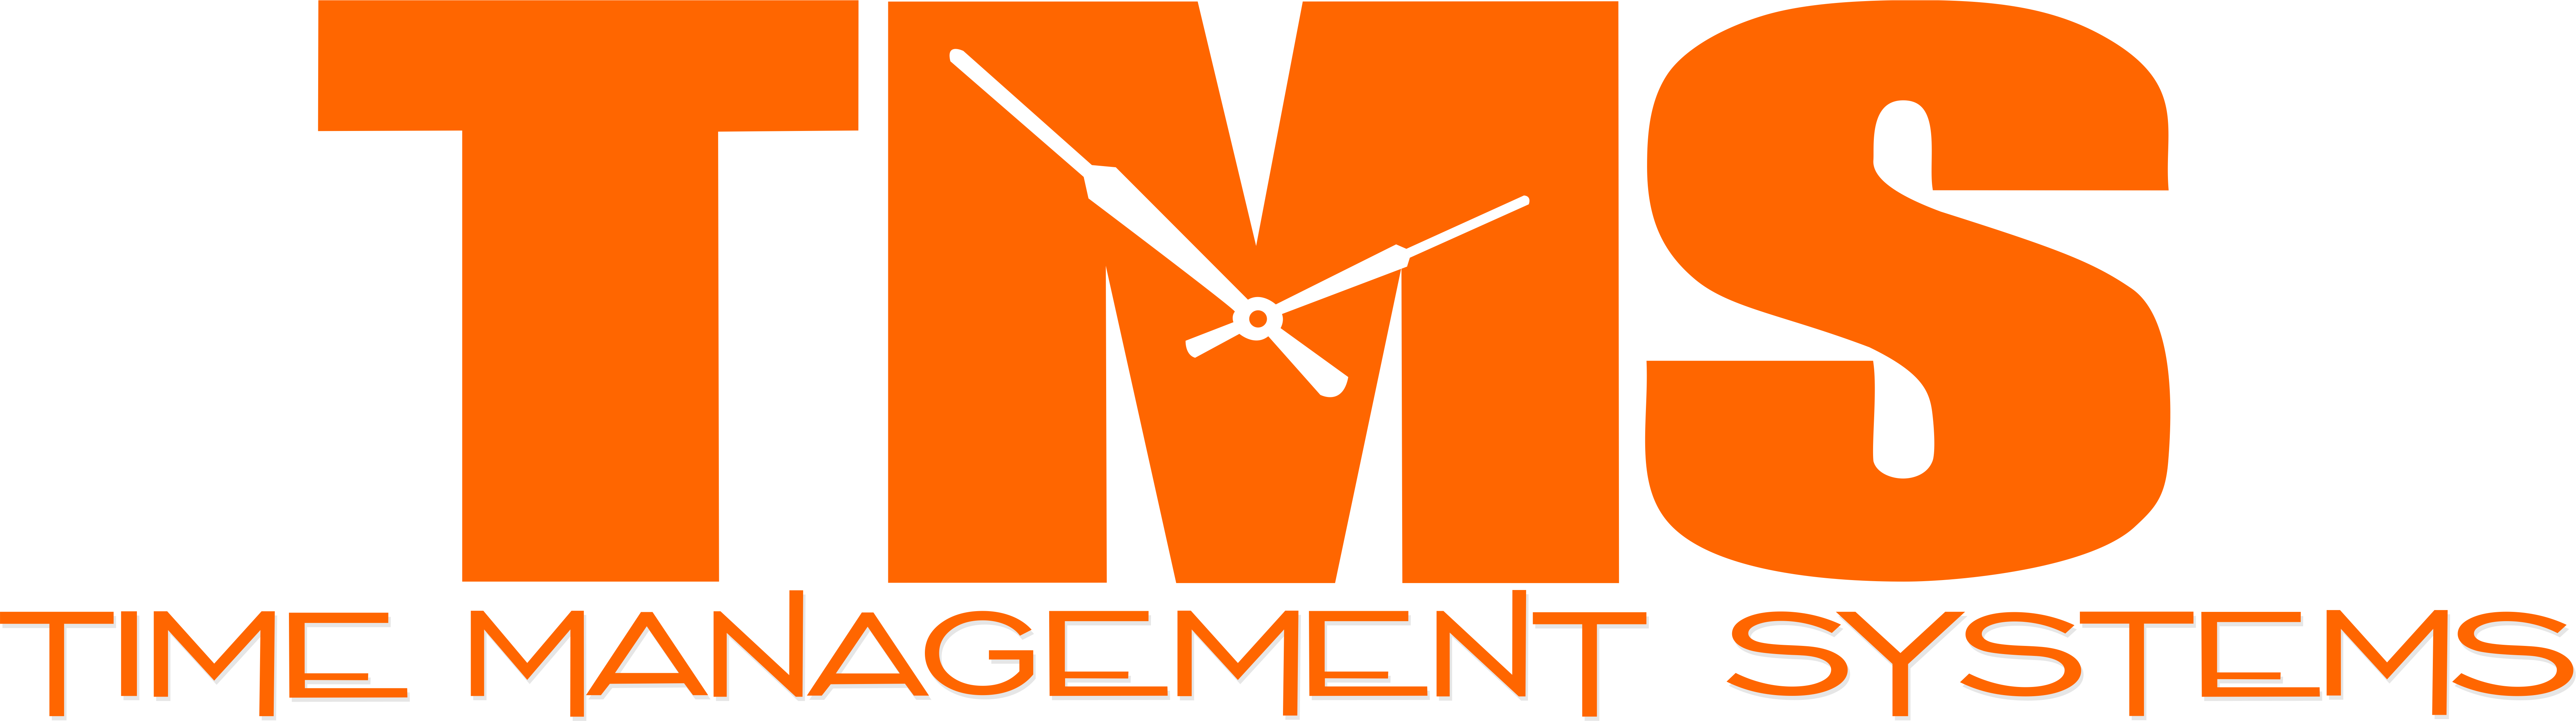 Time Management Systems